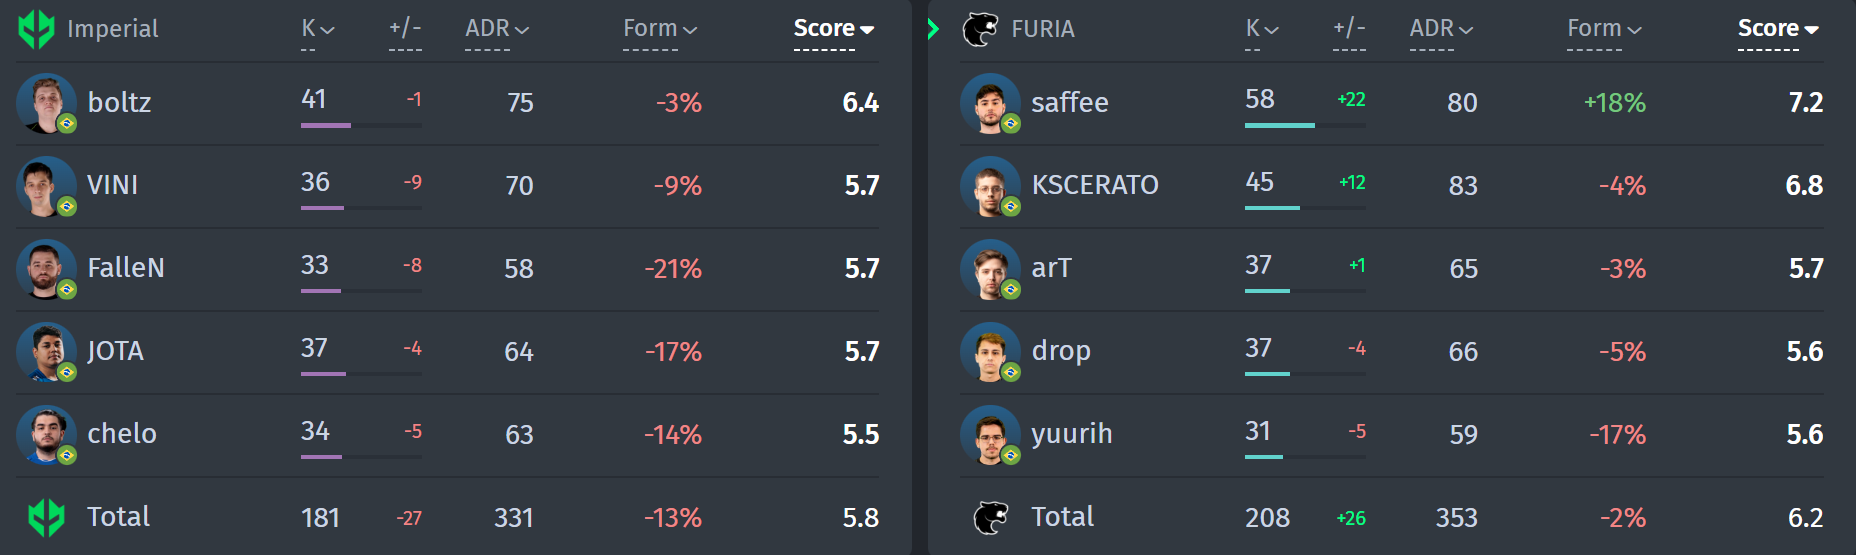 Statistics of the match FURIA — Imperial at EPL S17